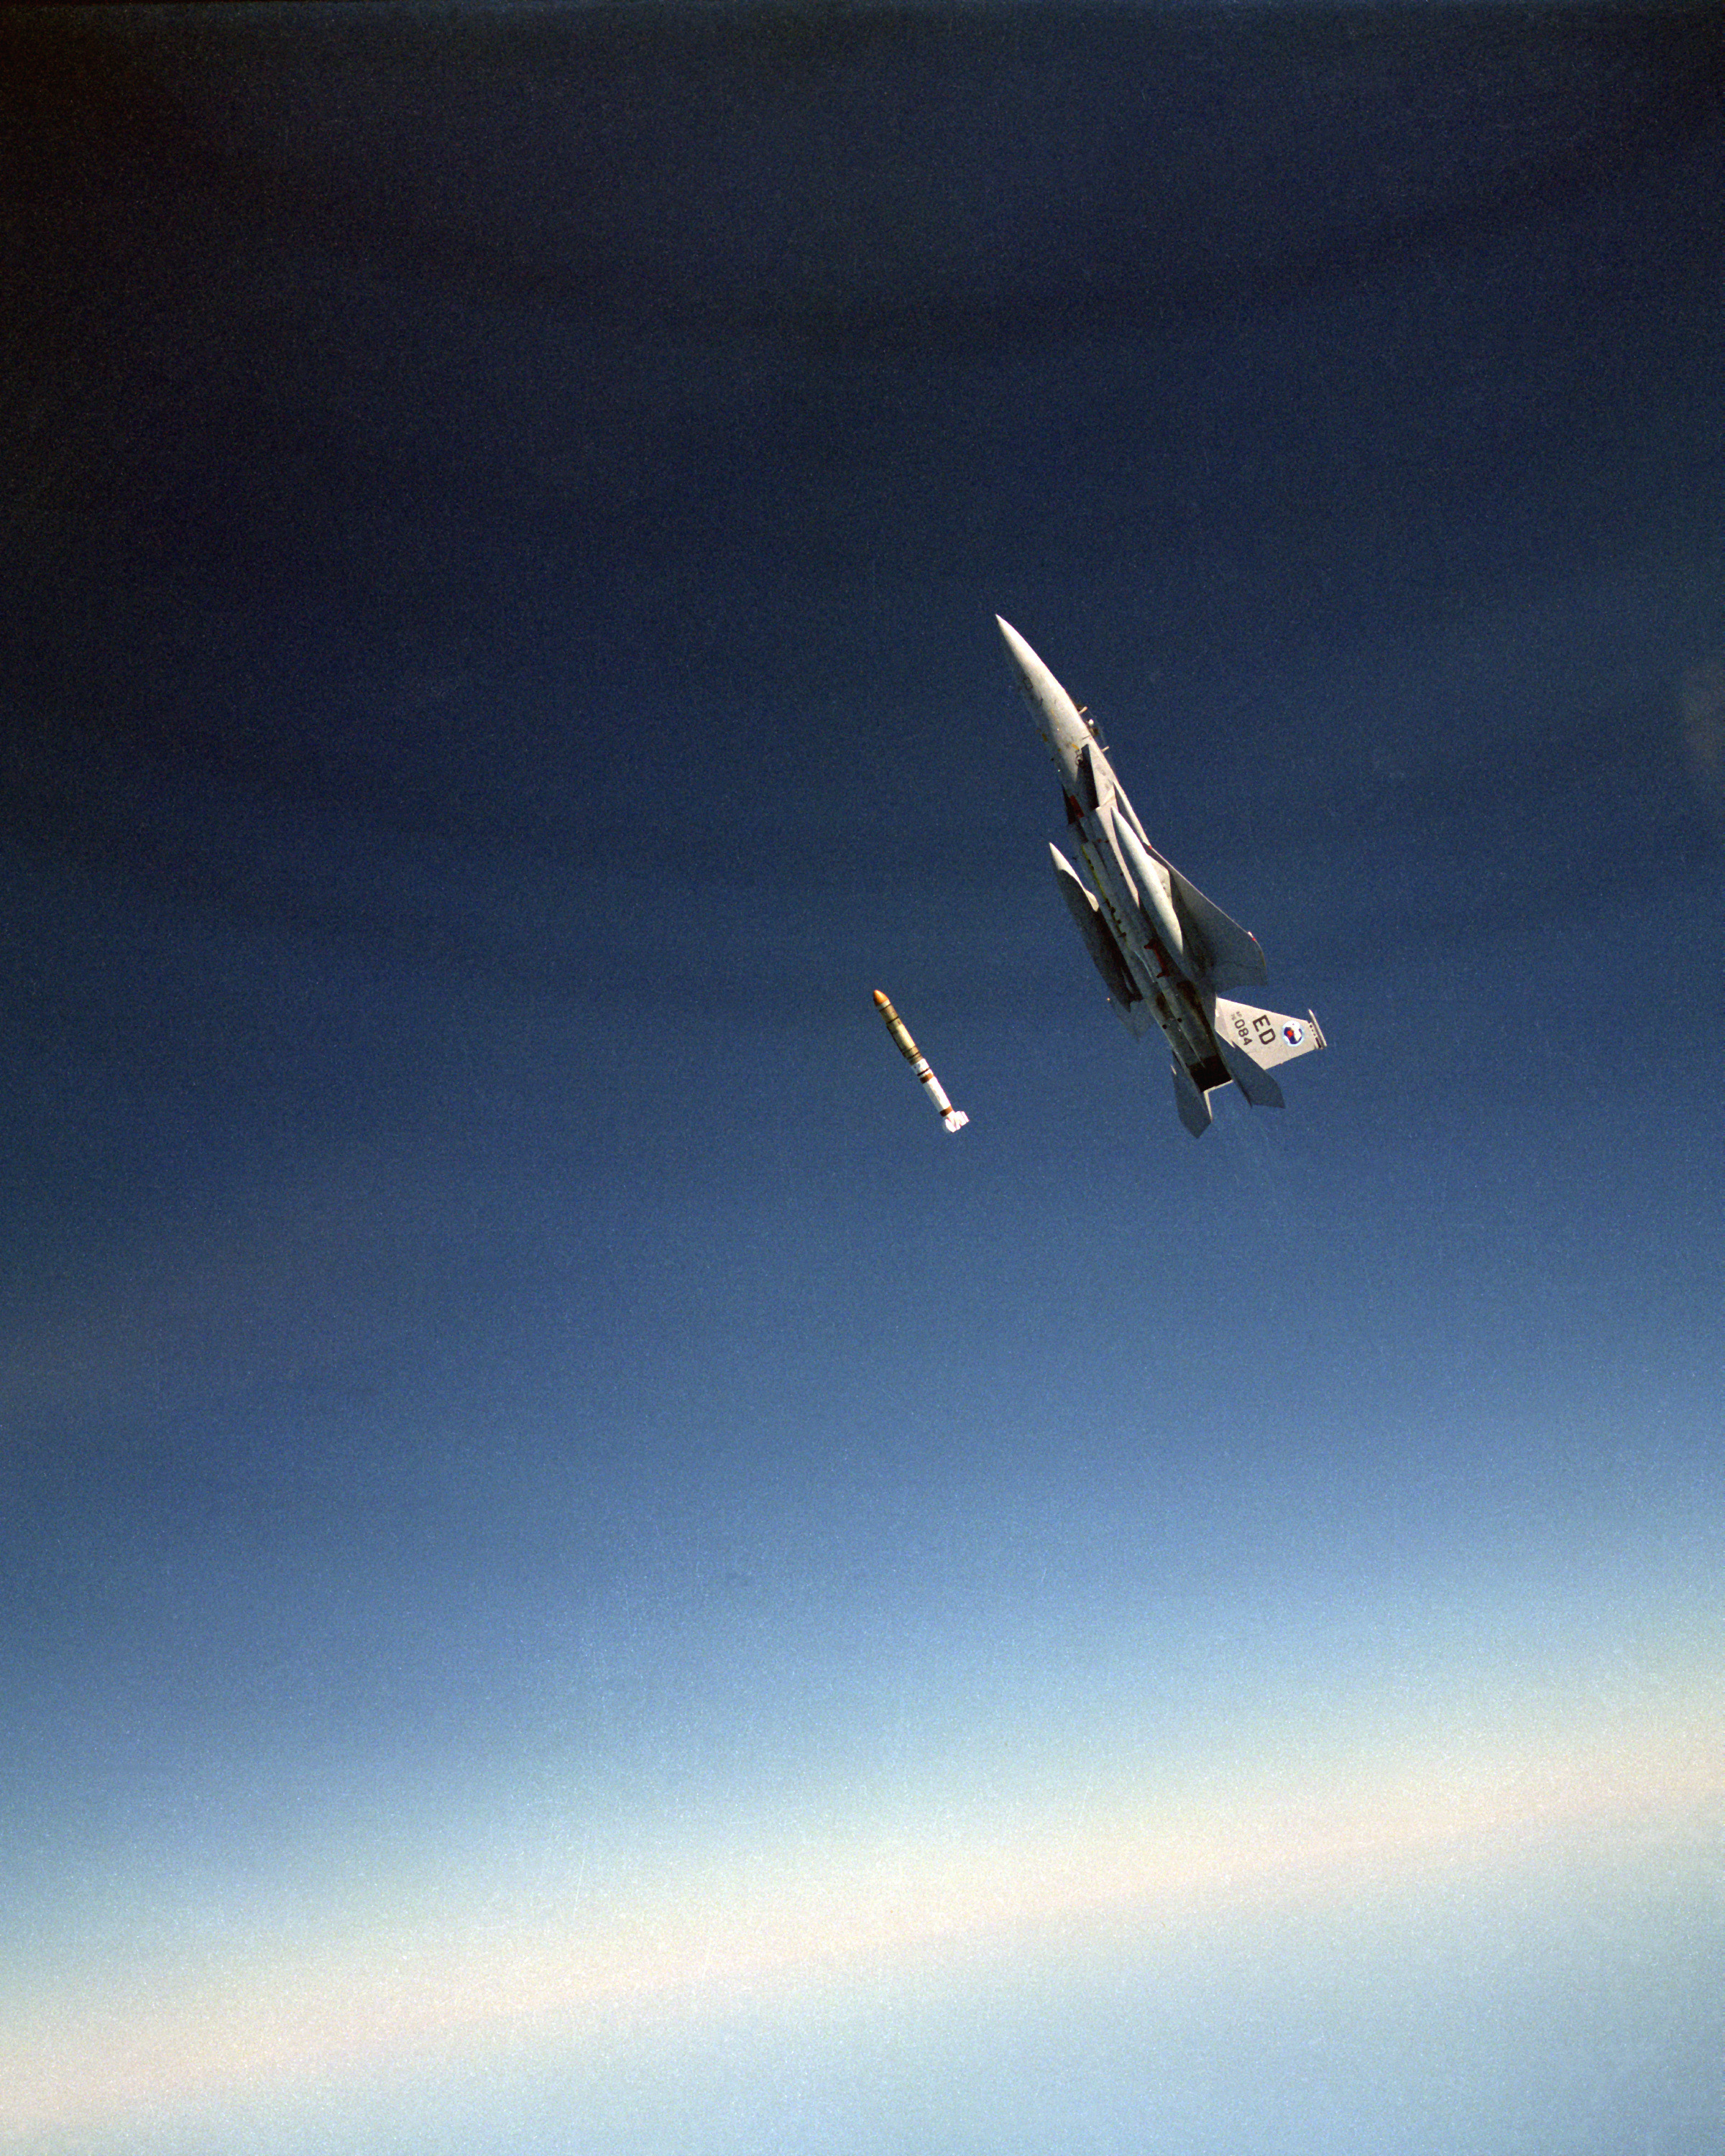 F-15 launches ASAT missile. (Credit: National Archives Catalog)